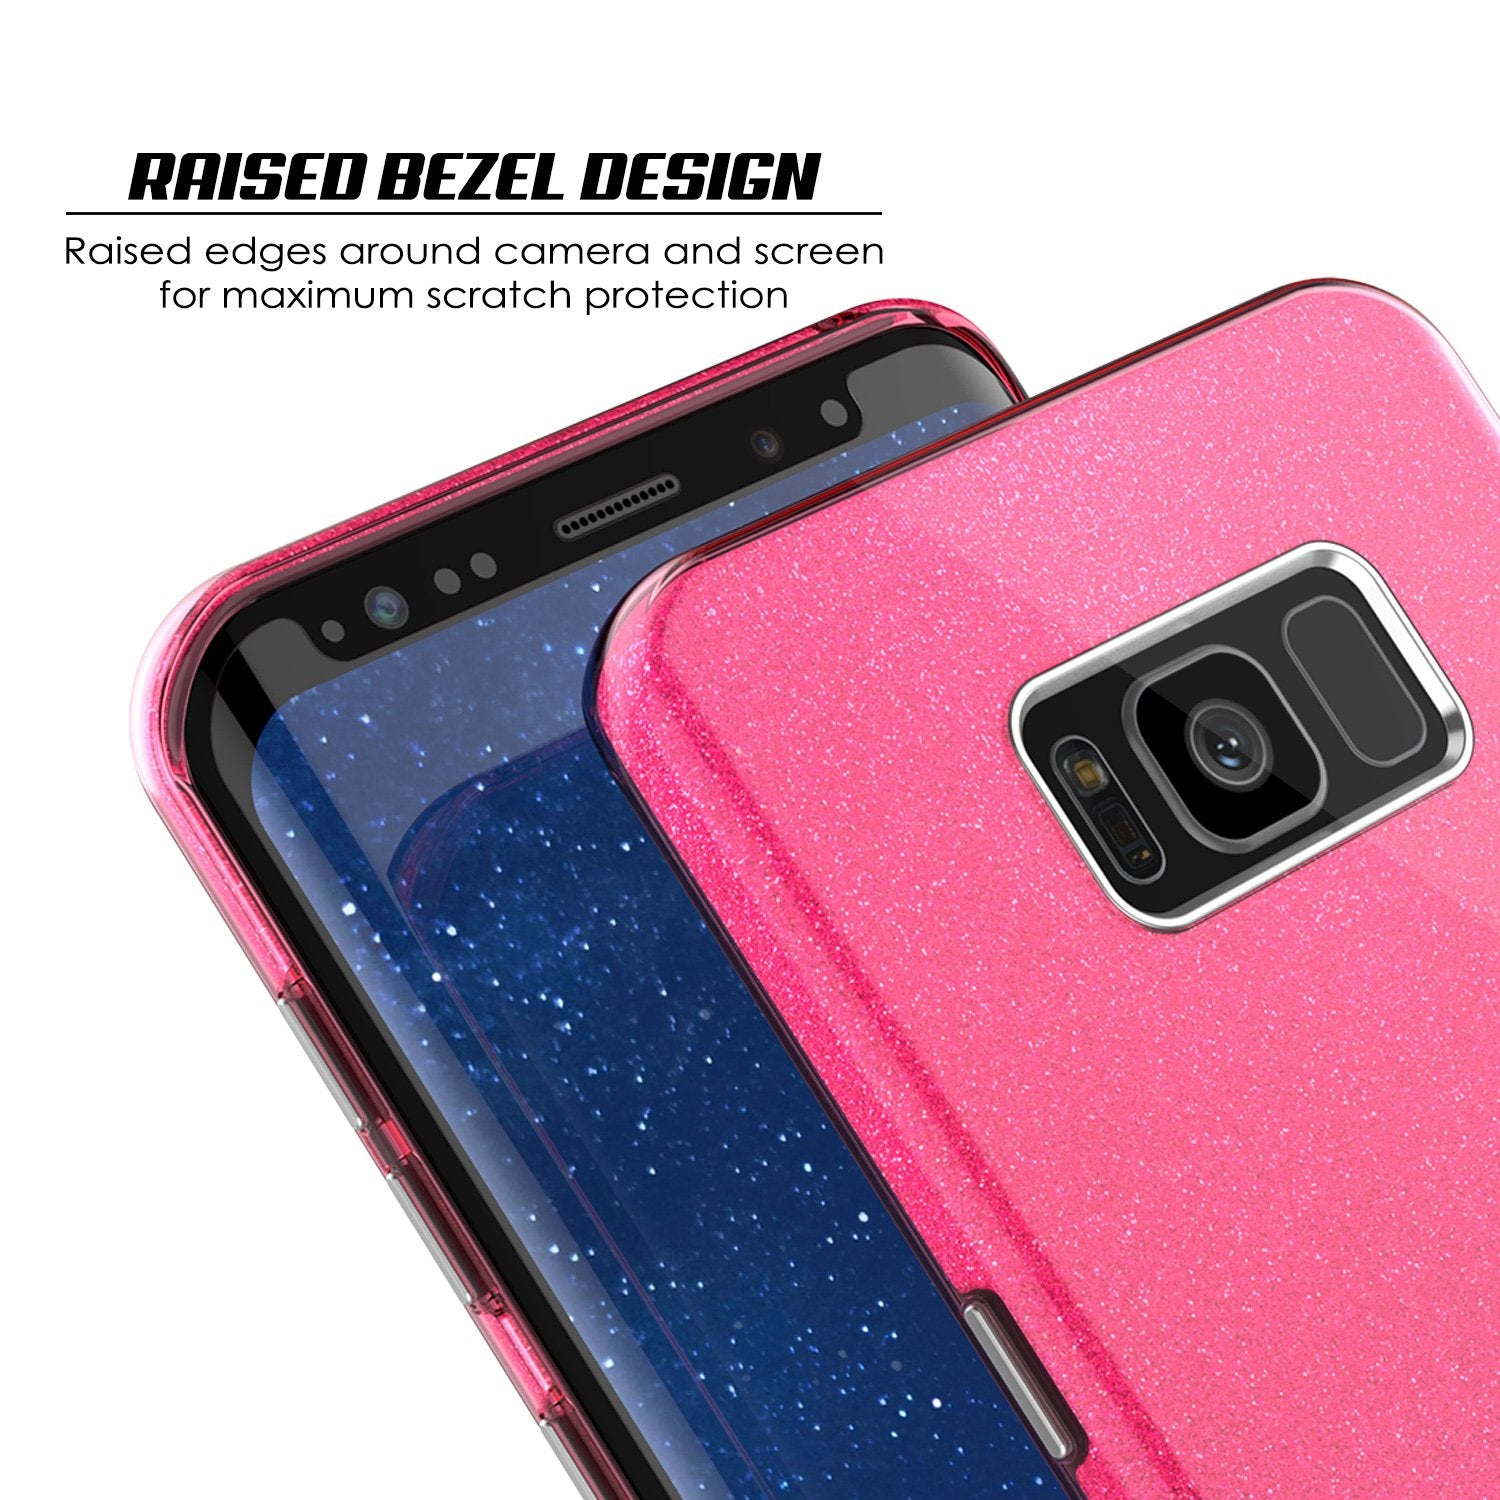 Galaxy S8 Case, Punkcase Galactic 2.0 Series Ultra Slim Protective Armor TPU Cover w/ PunkShield Screen Protector [Pink]